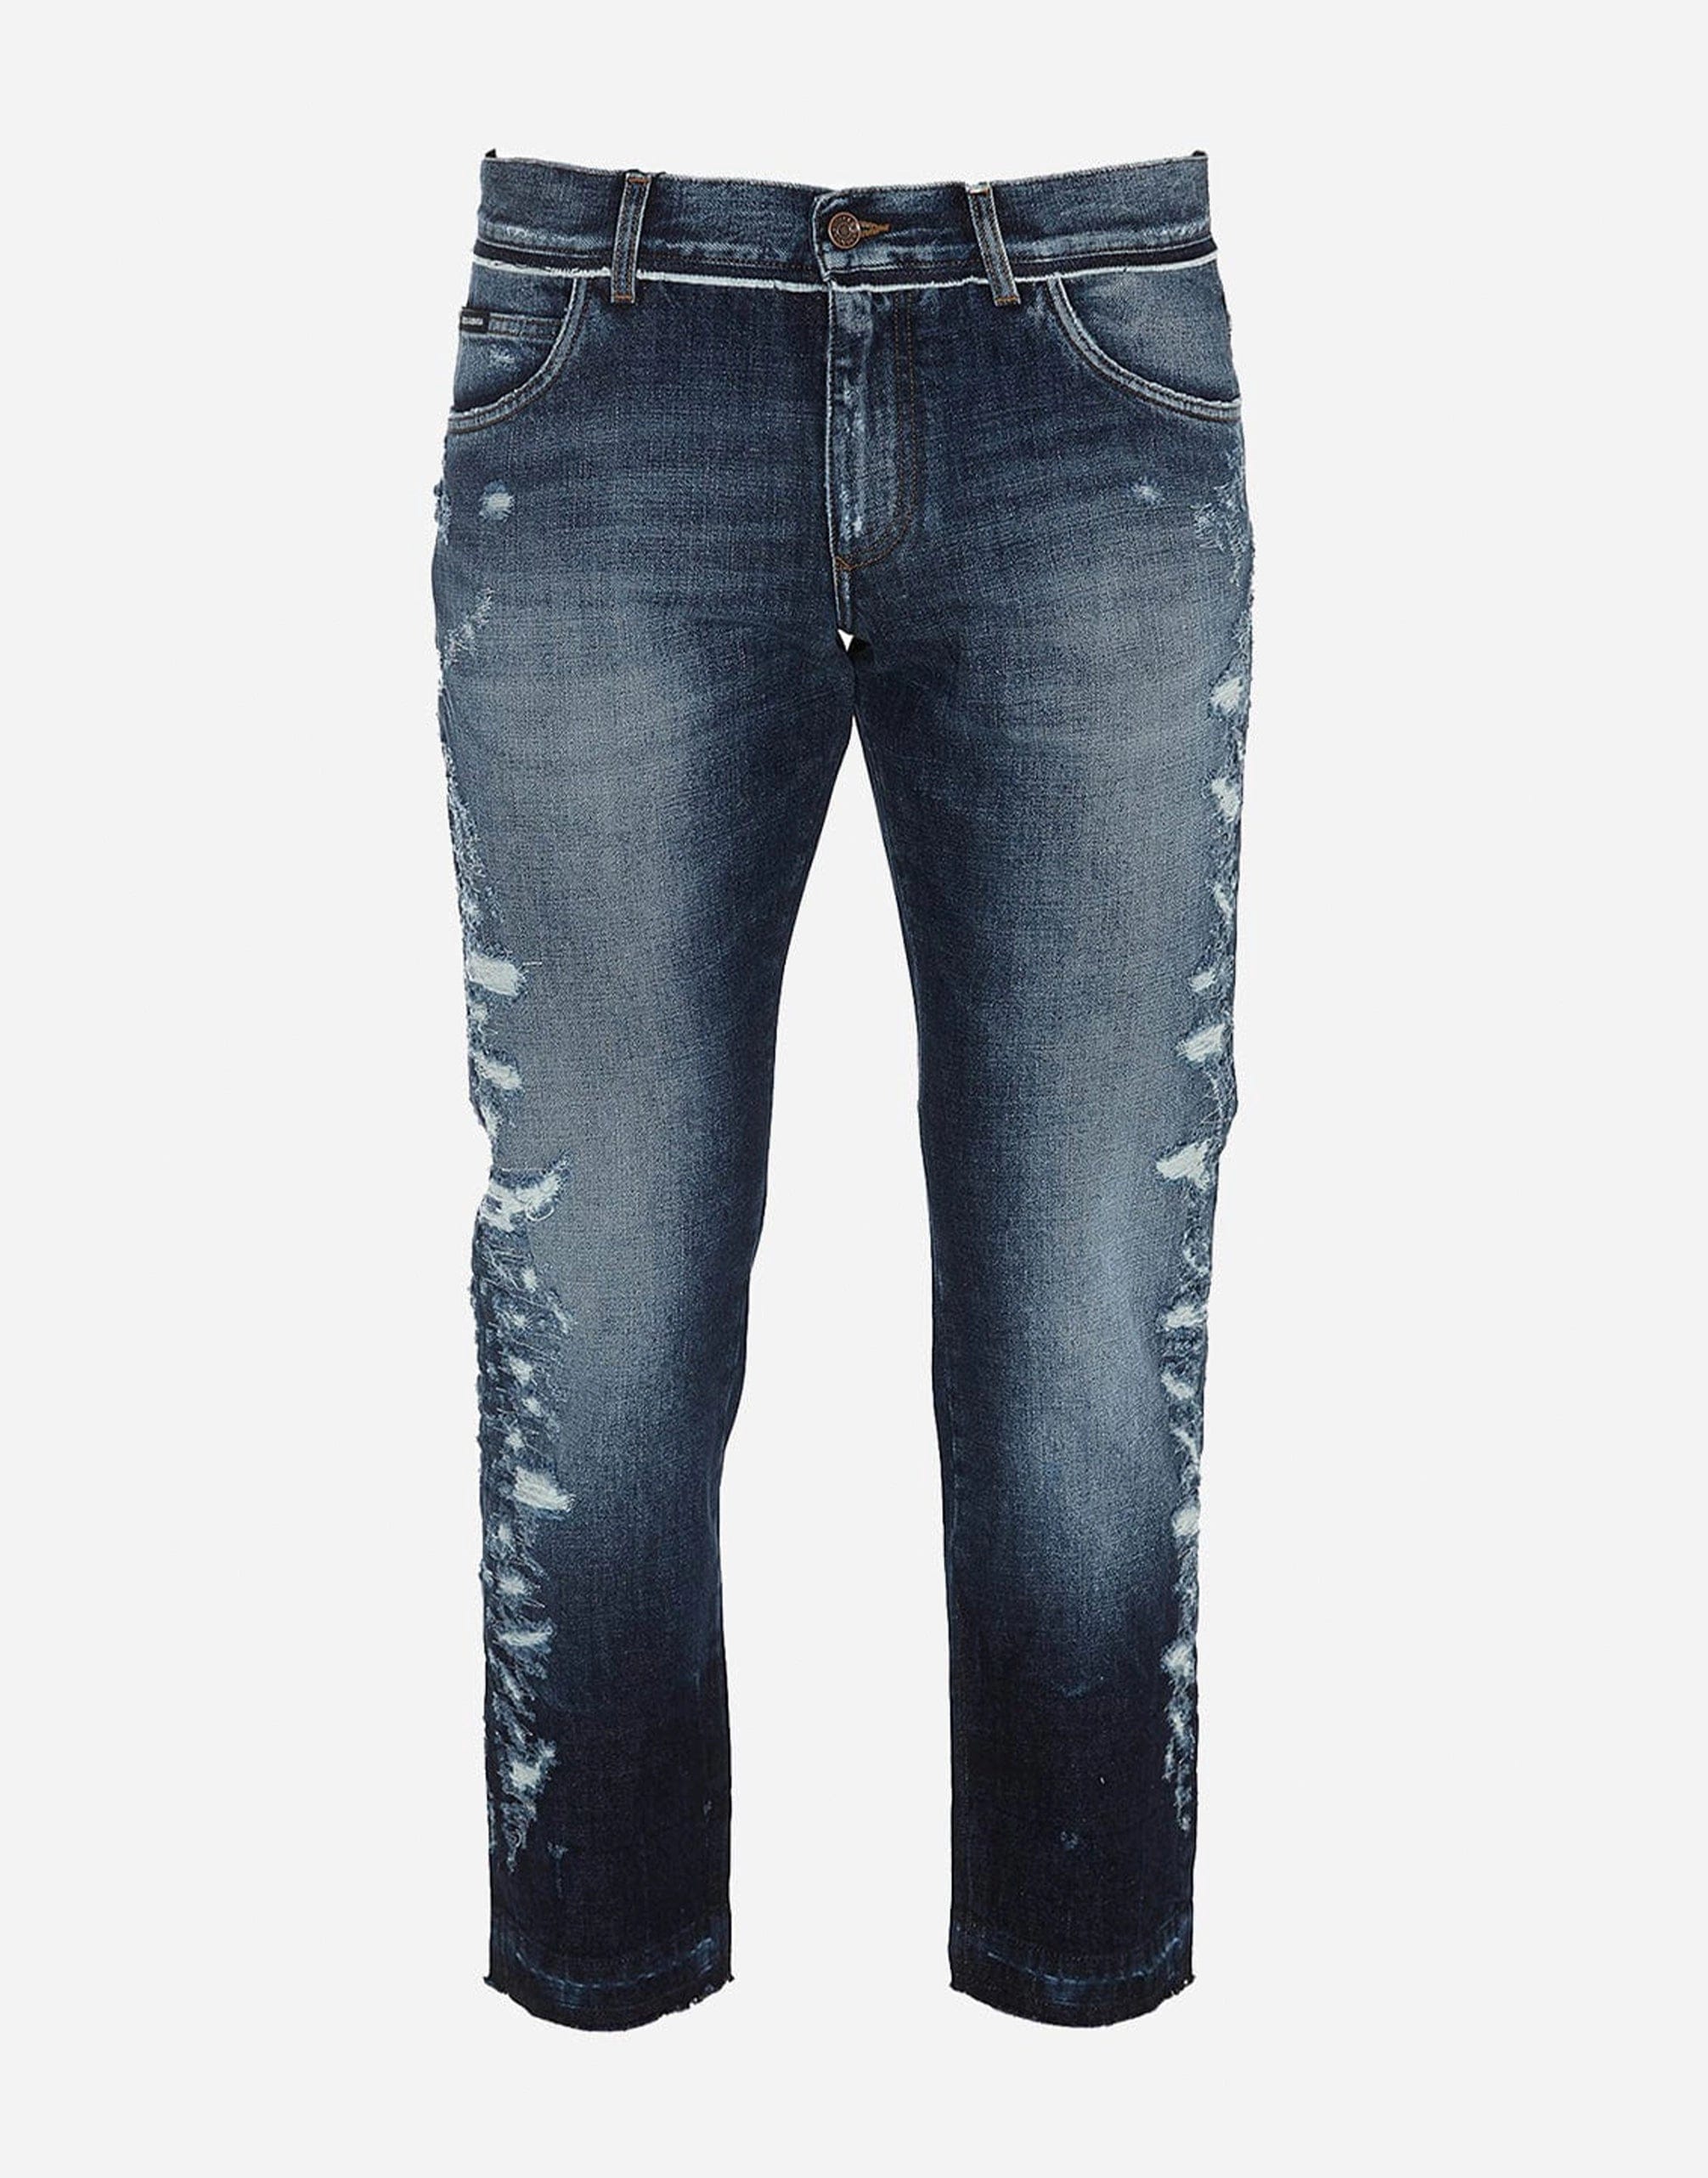 Dolce & Gabbana Distressed Effect Cropped Jeans